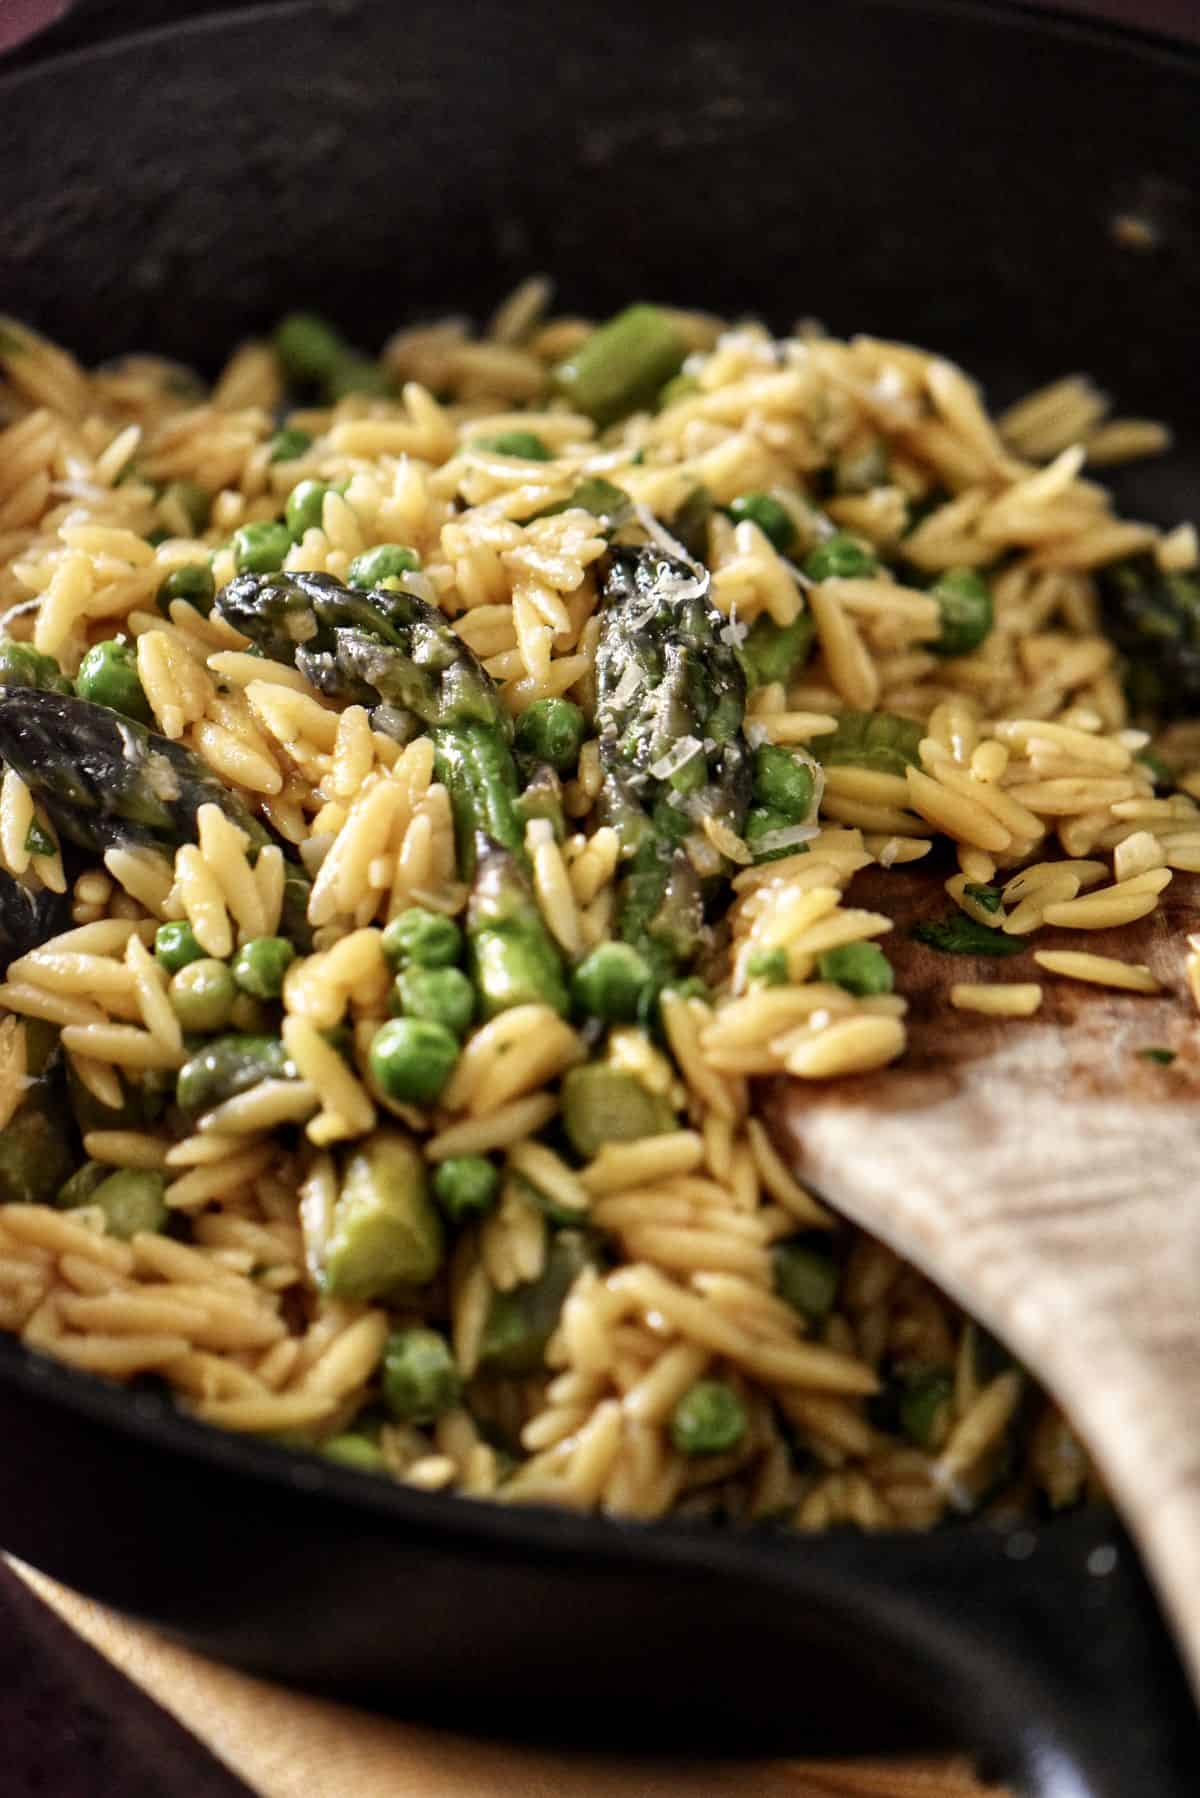 Orzo risotto combined with spring peas and asparagus in a pan.